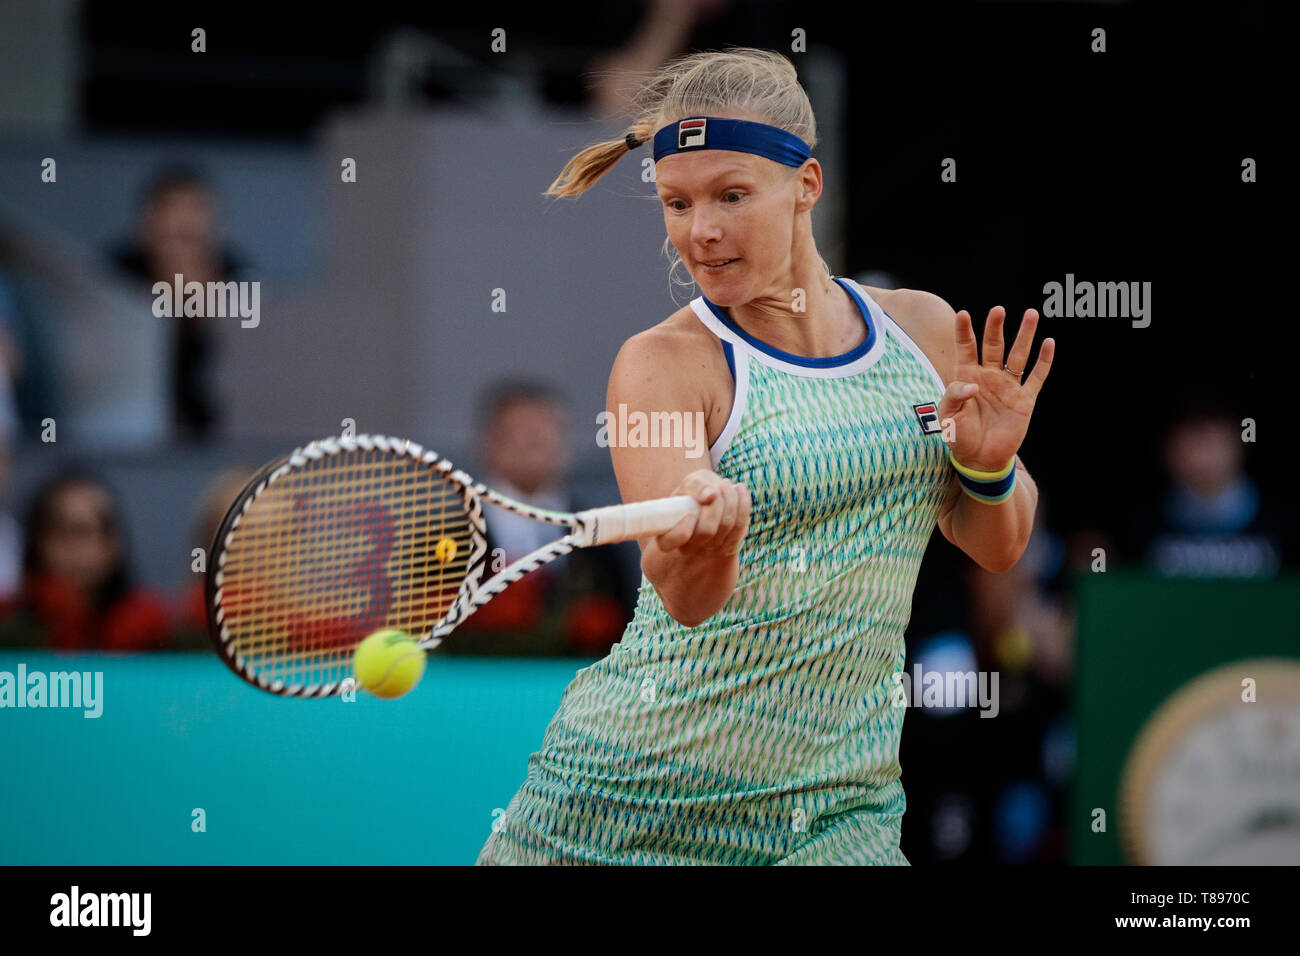 Kiki Bertens of the Netherlands seen in action against Simon Halep of  Romania during the Mutua Madrid Open Masters match on day eight at Caja  Magica in Madrid, Spain. Kiki Bertens beat